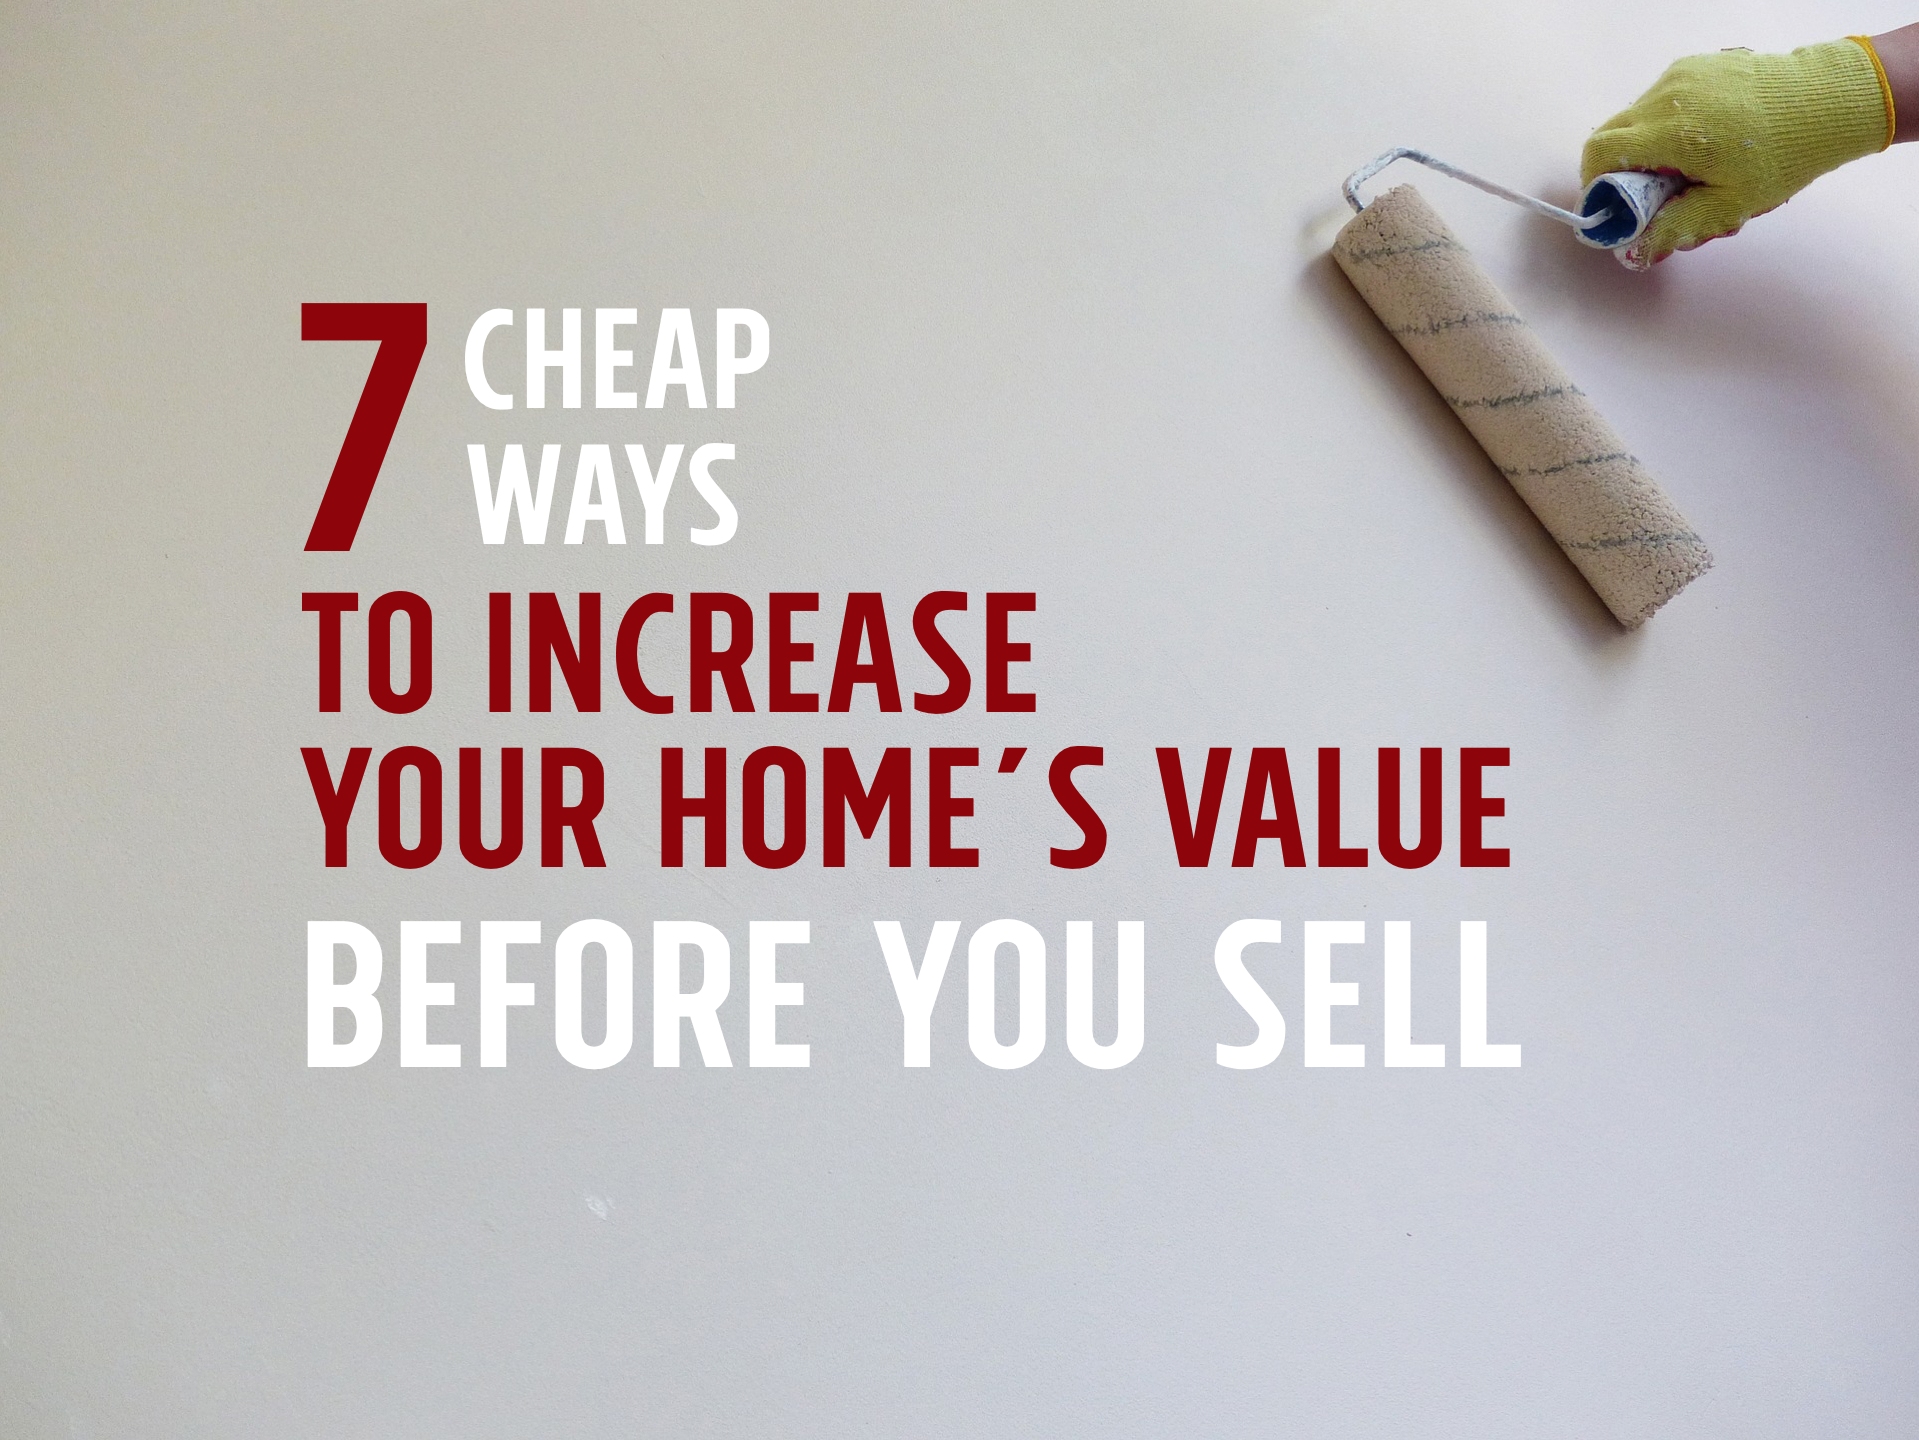 7 Cheap Ways To Increase Your Home's Value Before You Sell